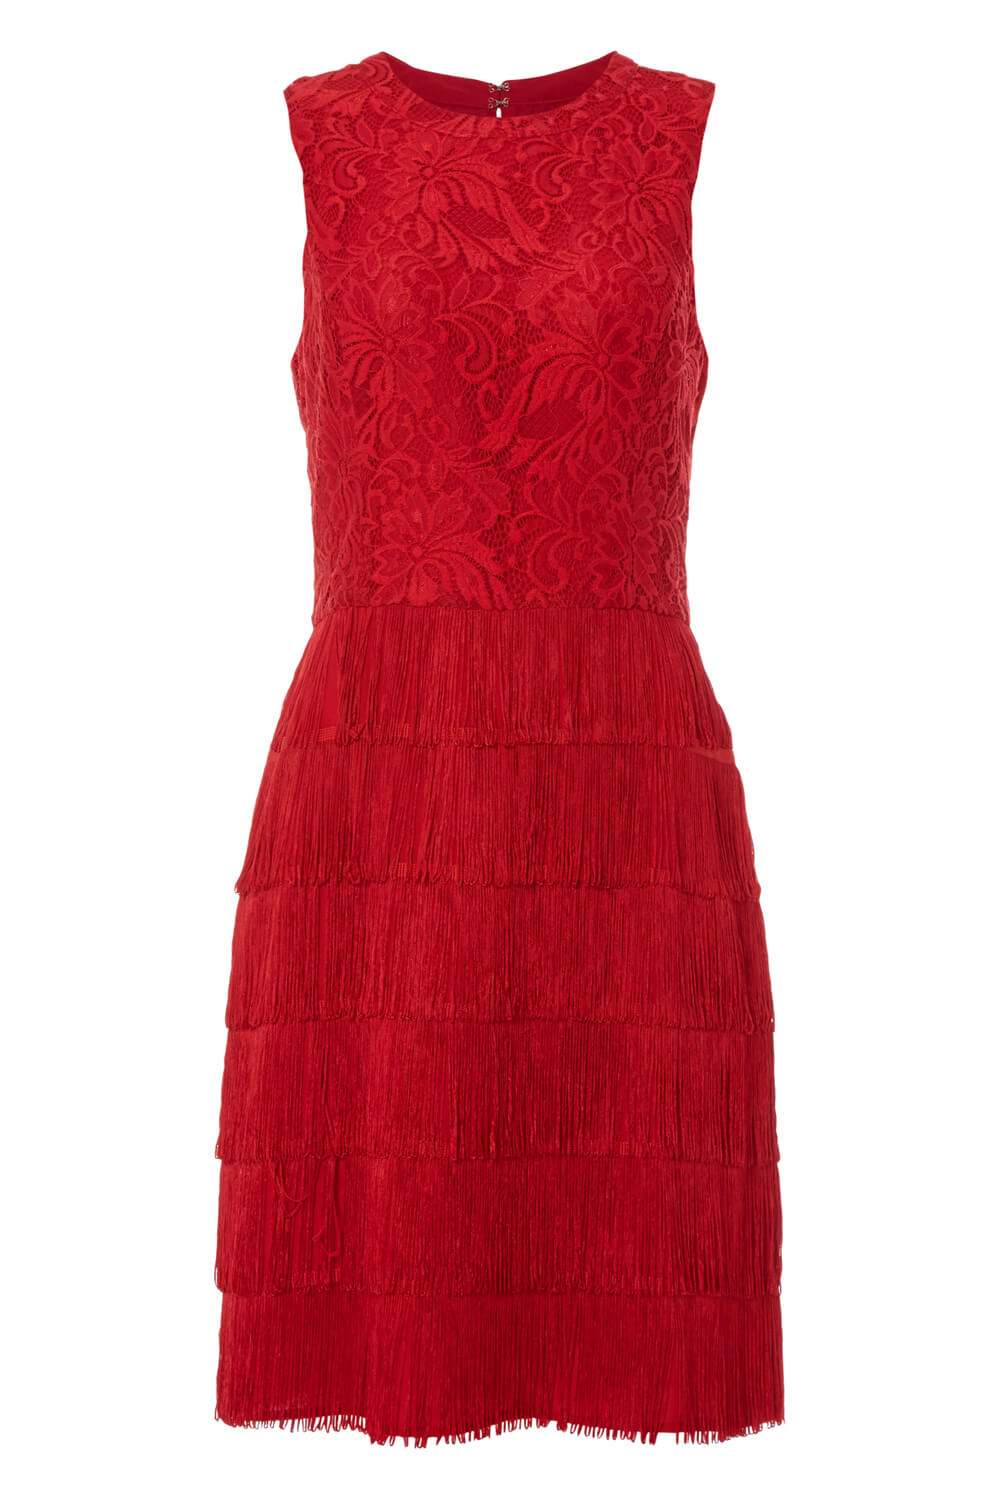 Red Lace Flapper Dress, Image 5 of 5